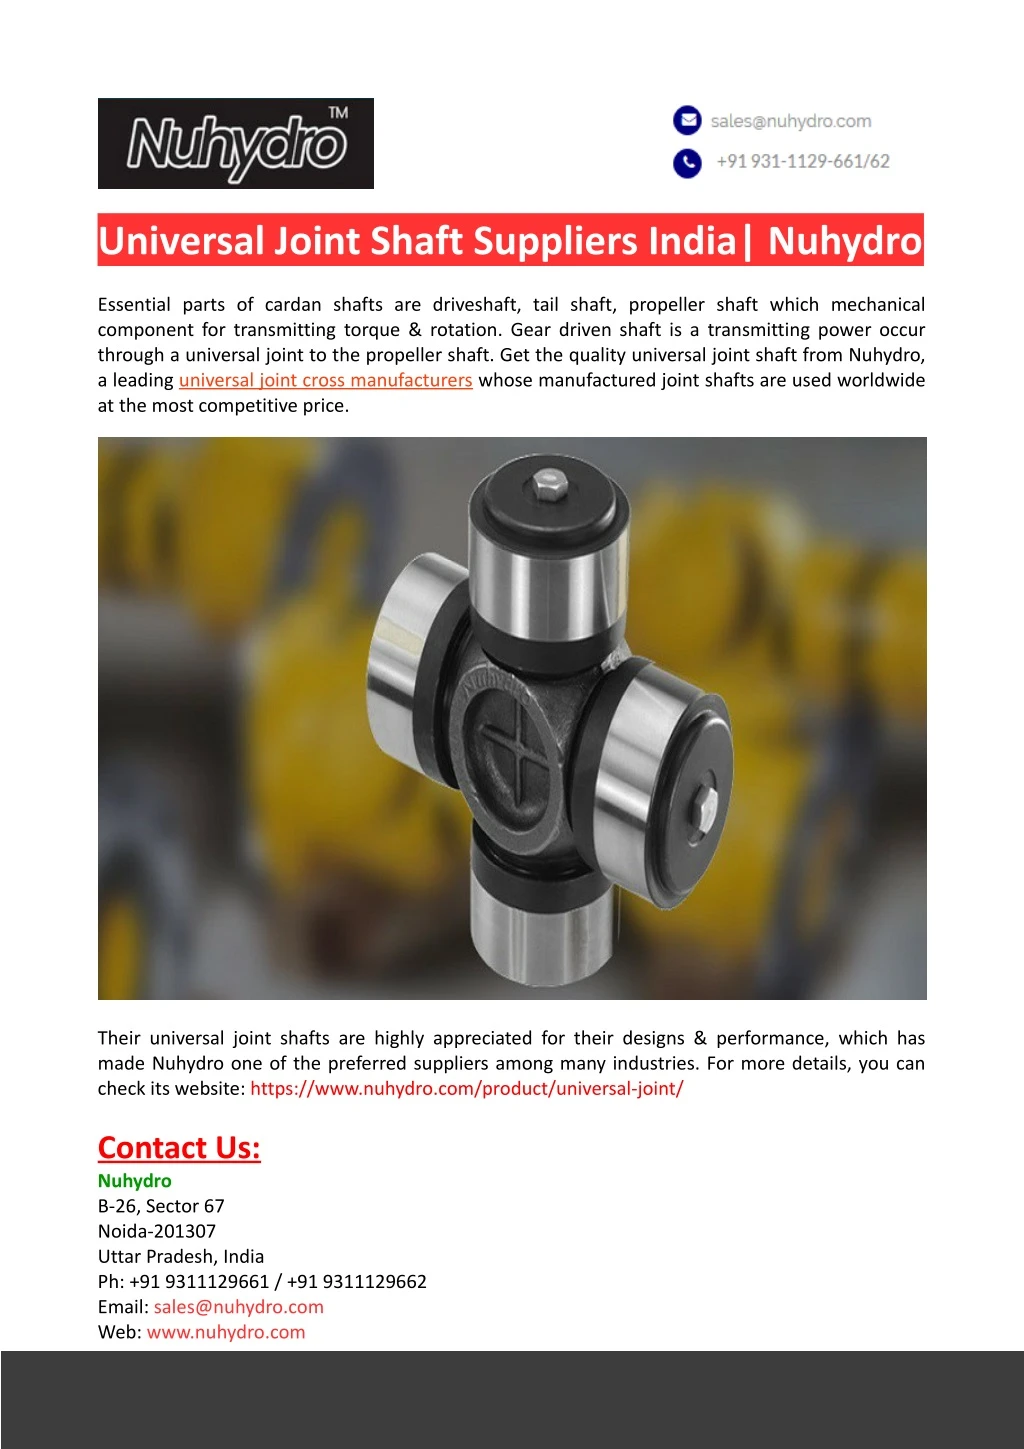 universal joint shaft suppliers india nuhydro